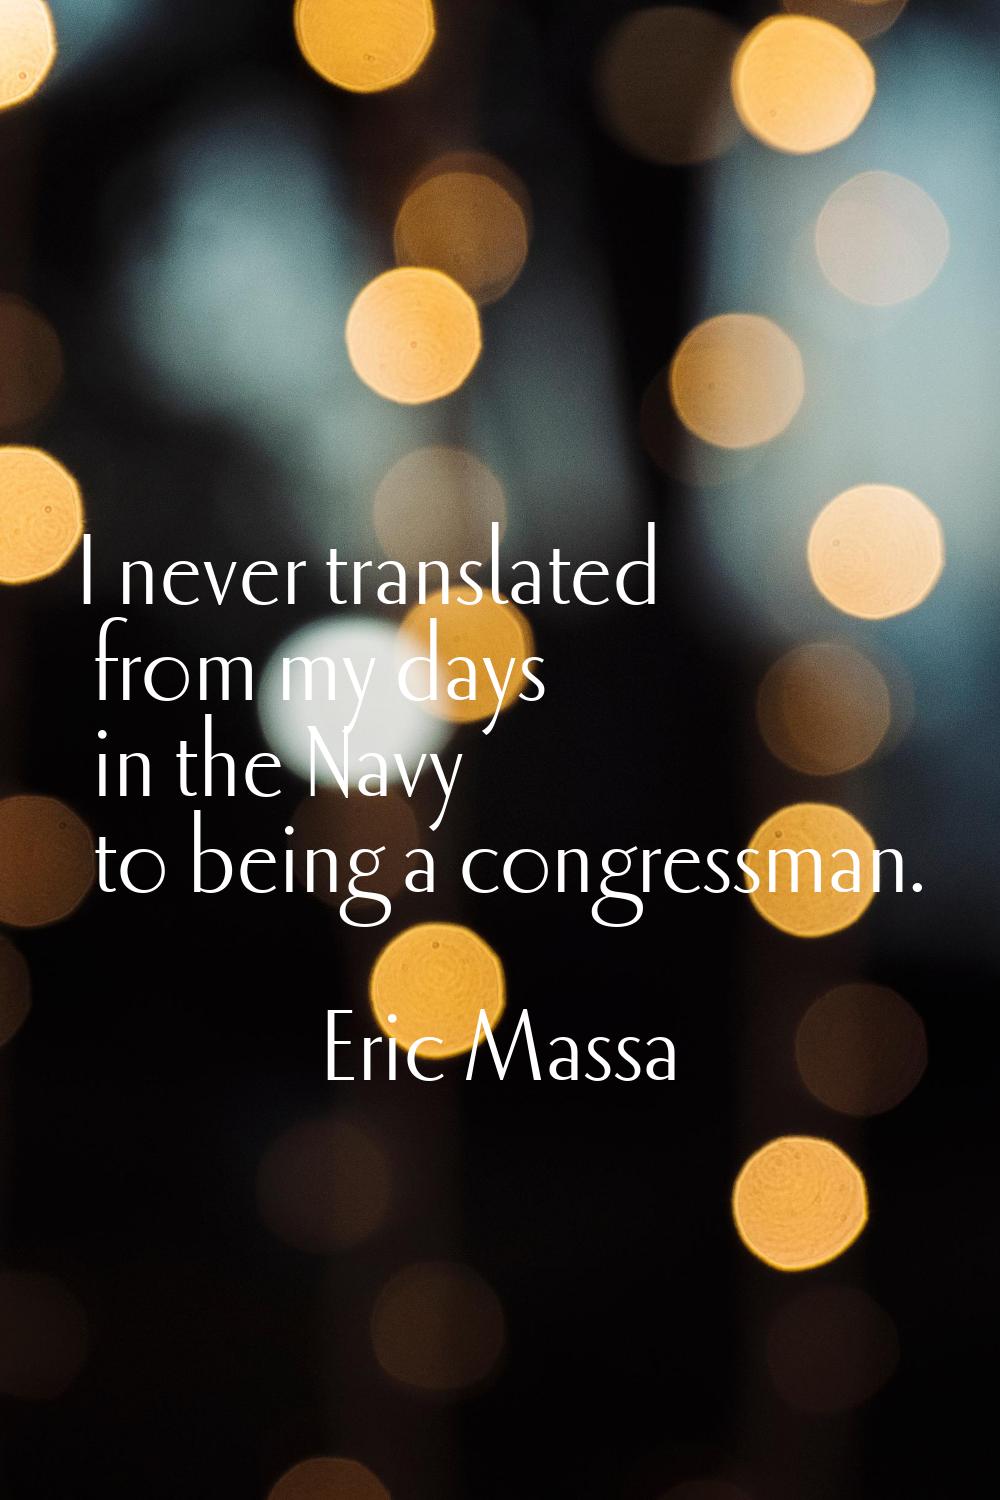 I never translated from my days in the Navy to being a congressman.